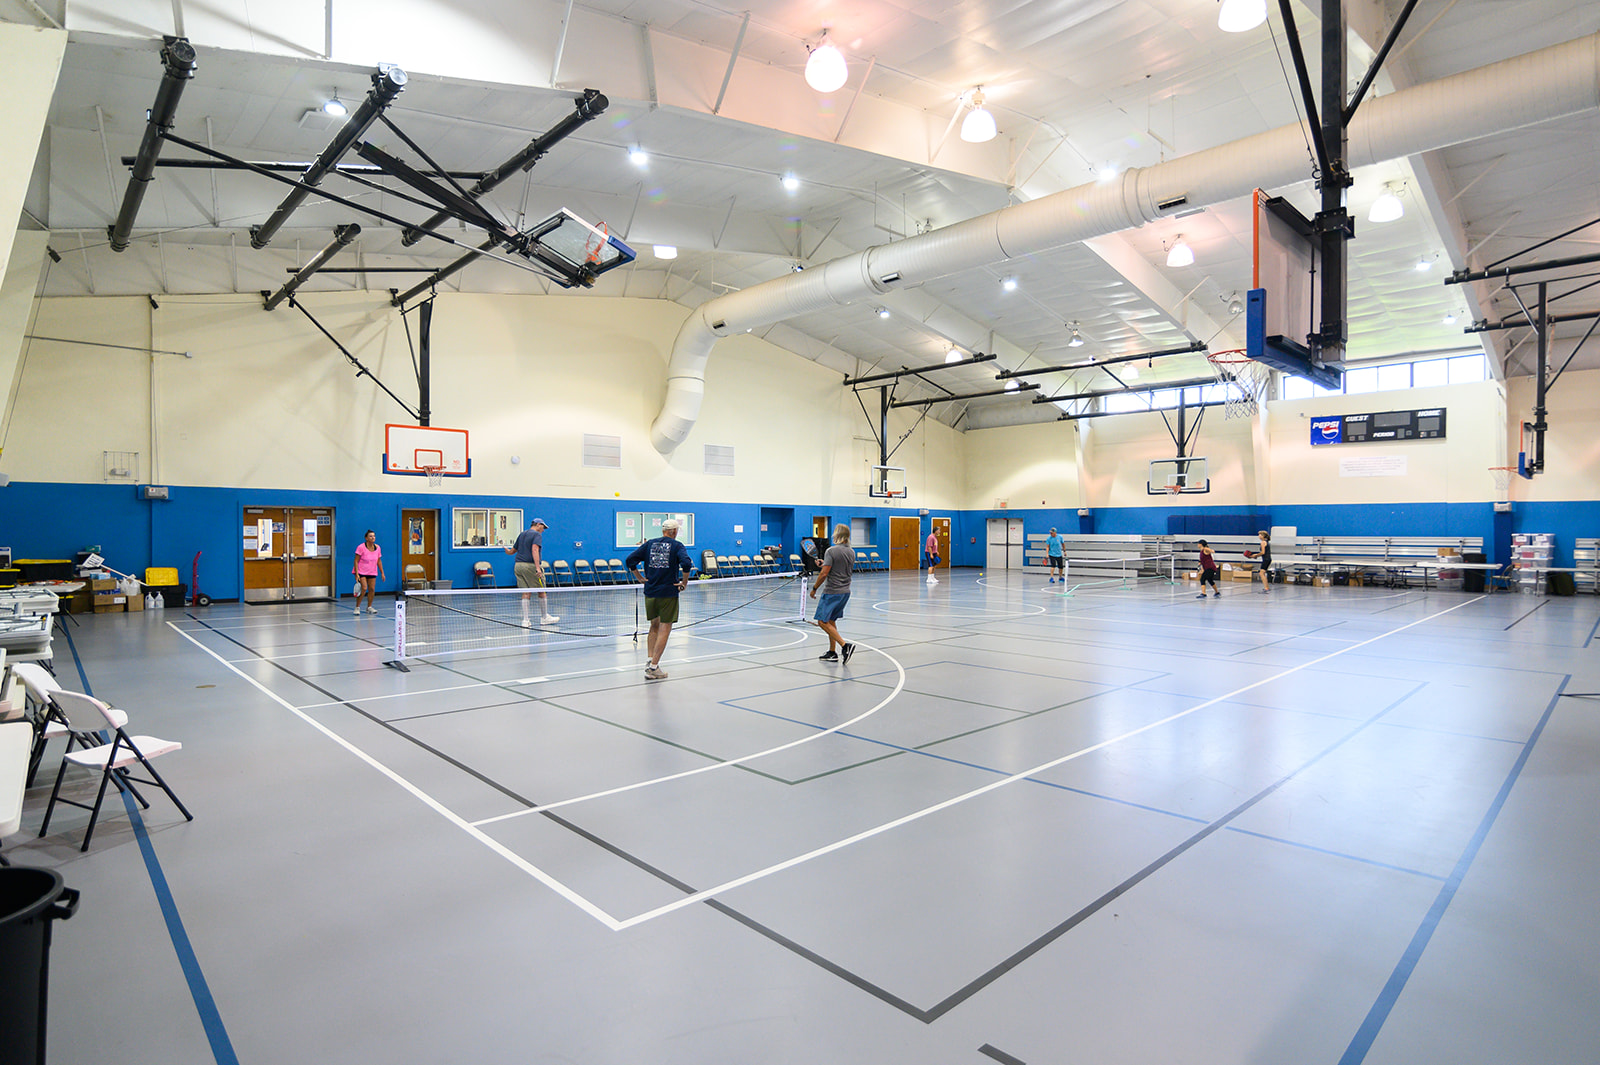 Image of four people playing pickleball on an indoor court.